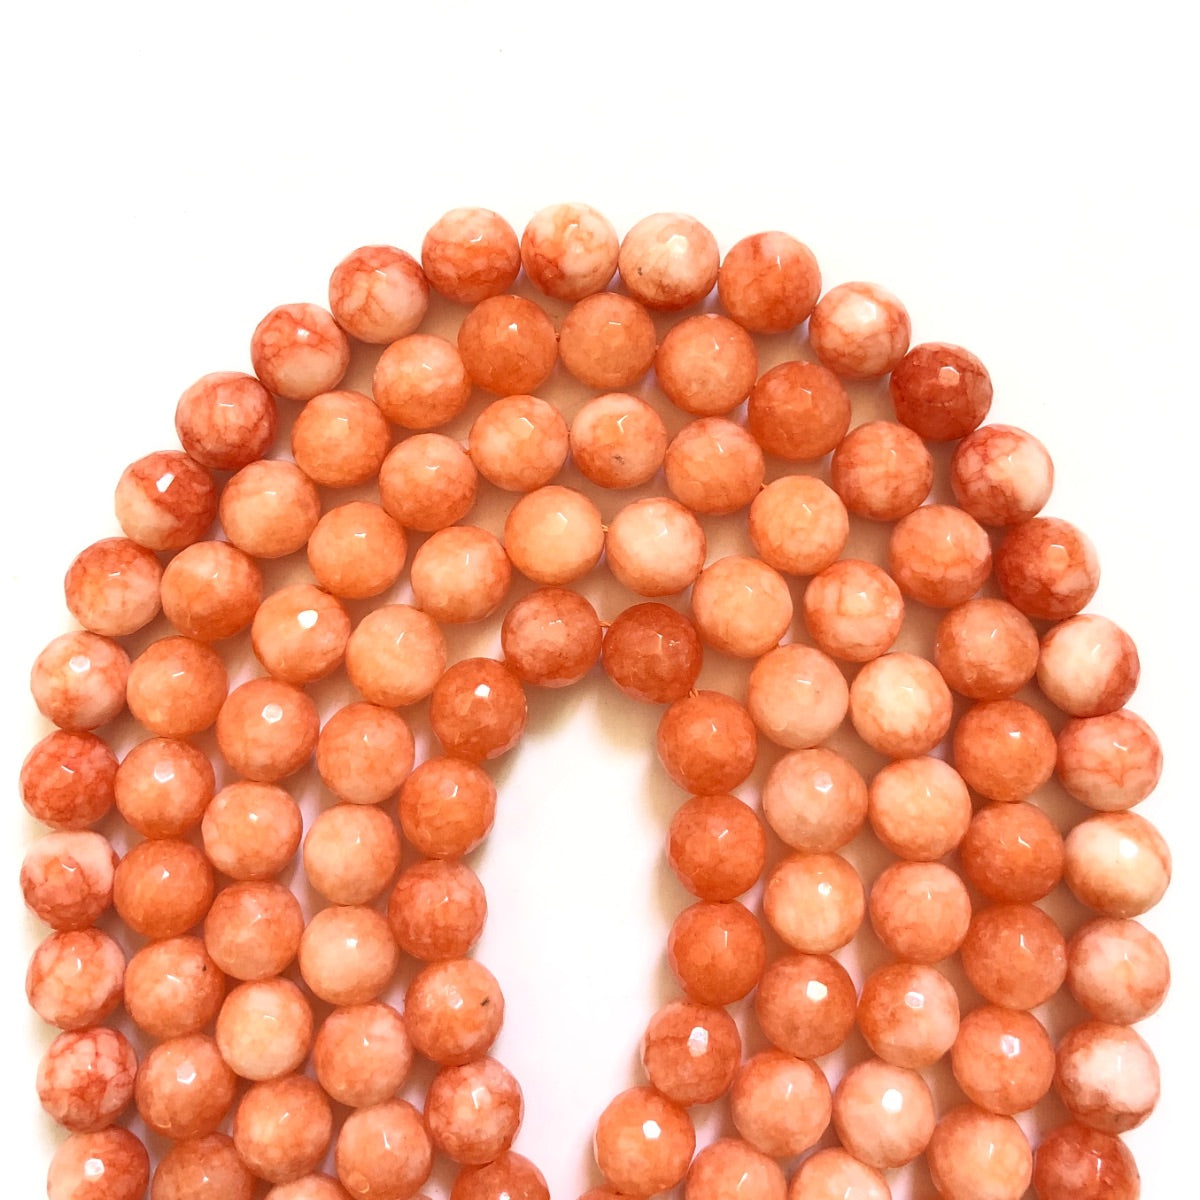 2 Strands/lot 12mm Orange Faceted Jade Stone Beads Stone Beads 12mm Stone Beads Faceted Jade Beads New Beads Arrivals Charms Beads Beyond